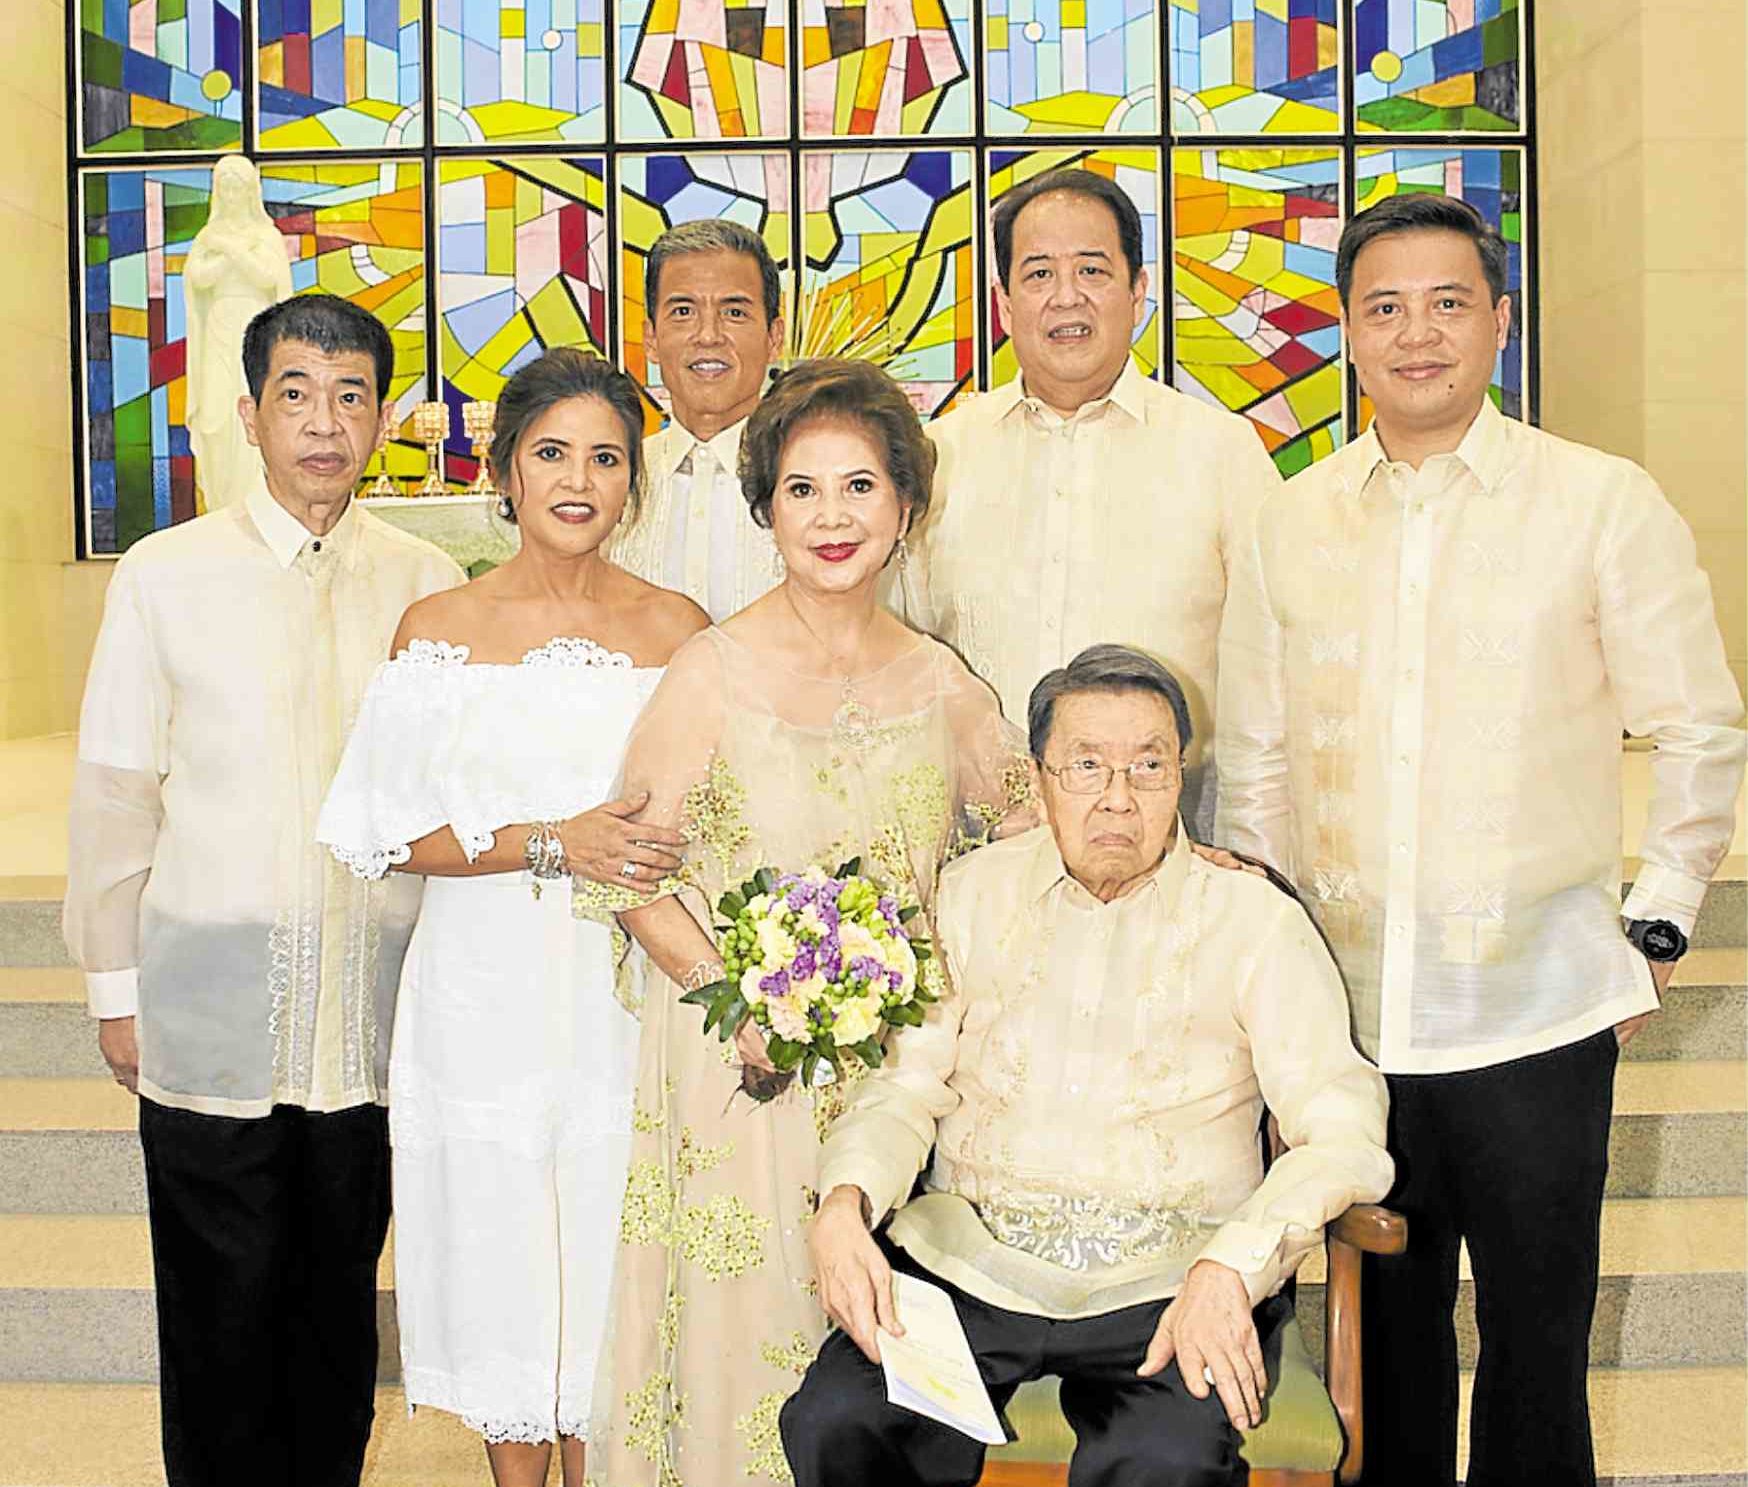 The Concepcion couple with their children (from left) Stephen, Rica, Patrick, Joseph and Anthony